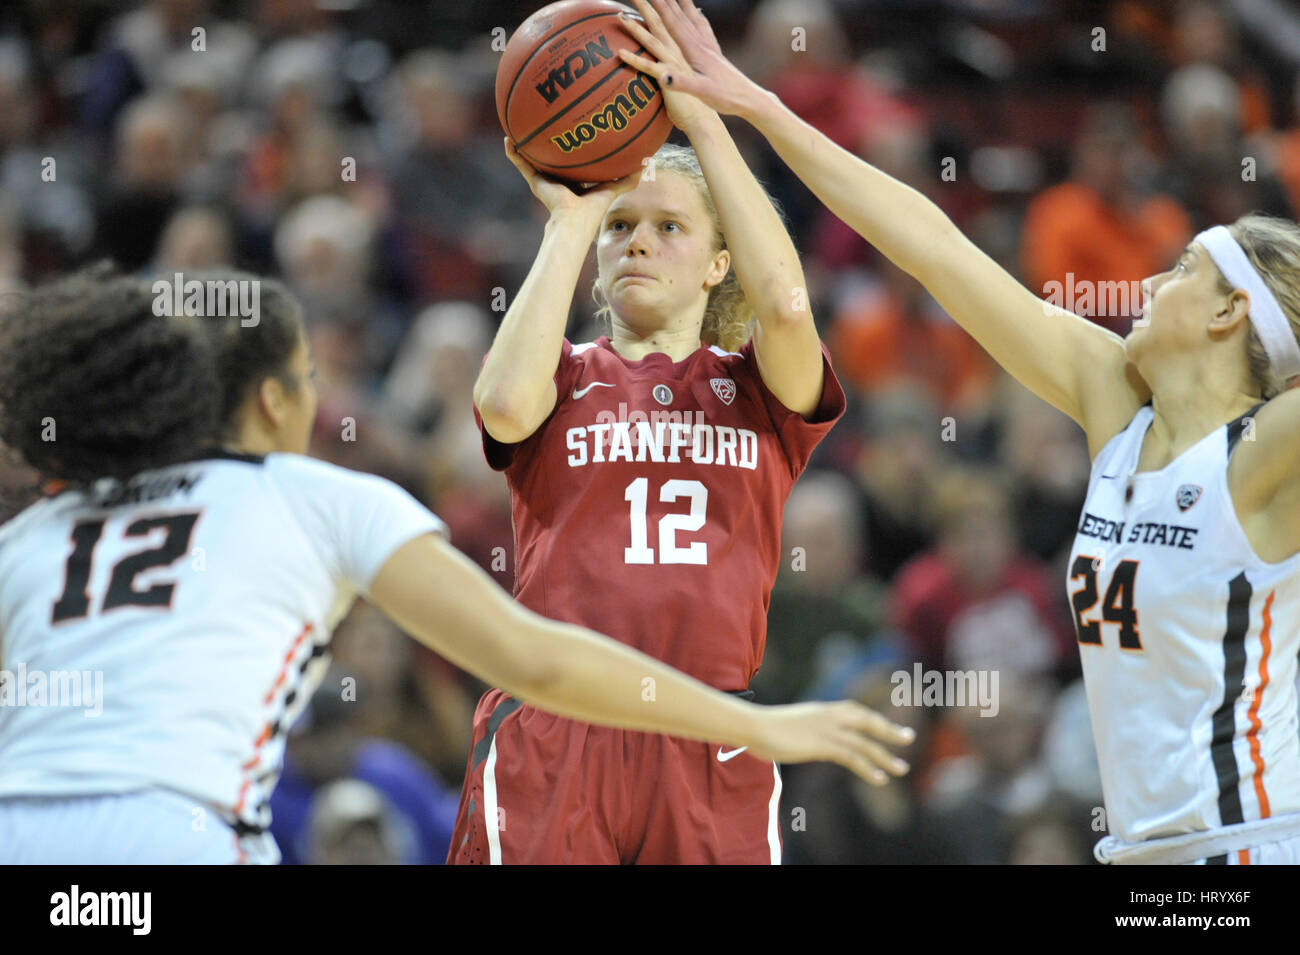 Seattle, WA, USA. 5th Mar, 2017. Stanford's Brittany McPhee (12) attempting a 3 point shot during the PAC12 women's tournament final between the Oregon State Beavers and the Stanford Cardinal. The game was played at Key Arena in Seattle, WA. Jeff Halstead/CSM/Alamy Live News Stock Photo